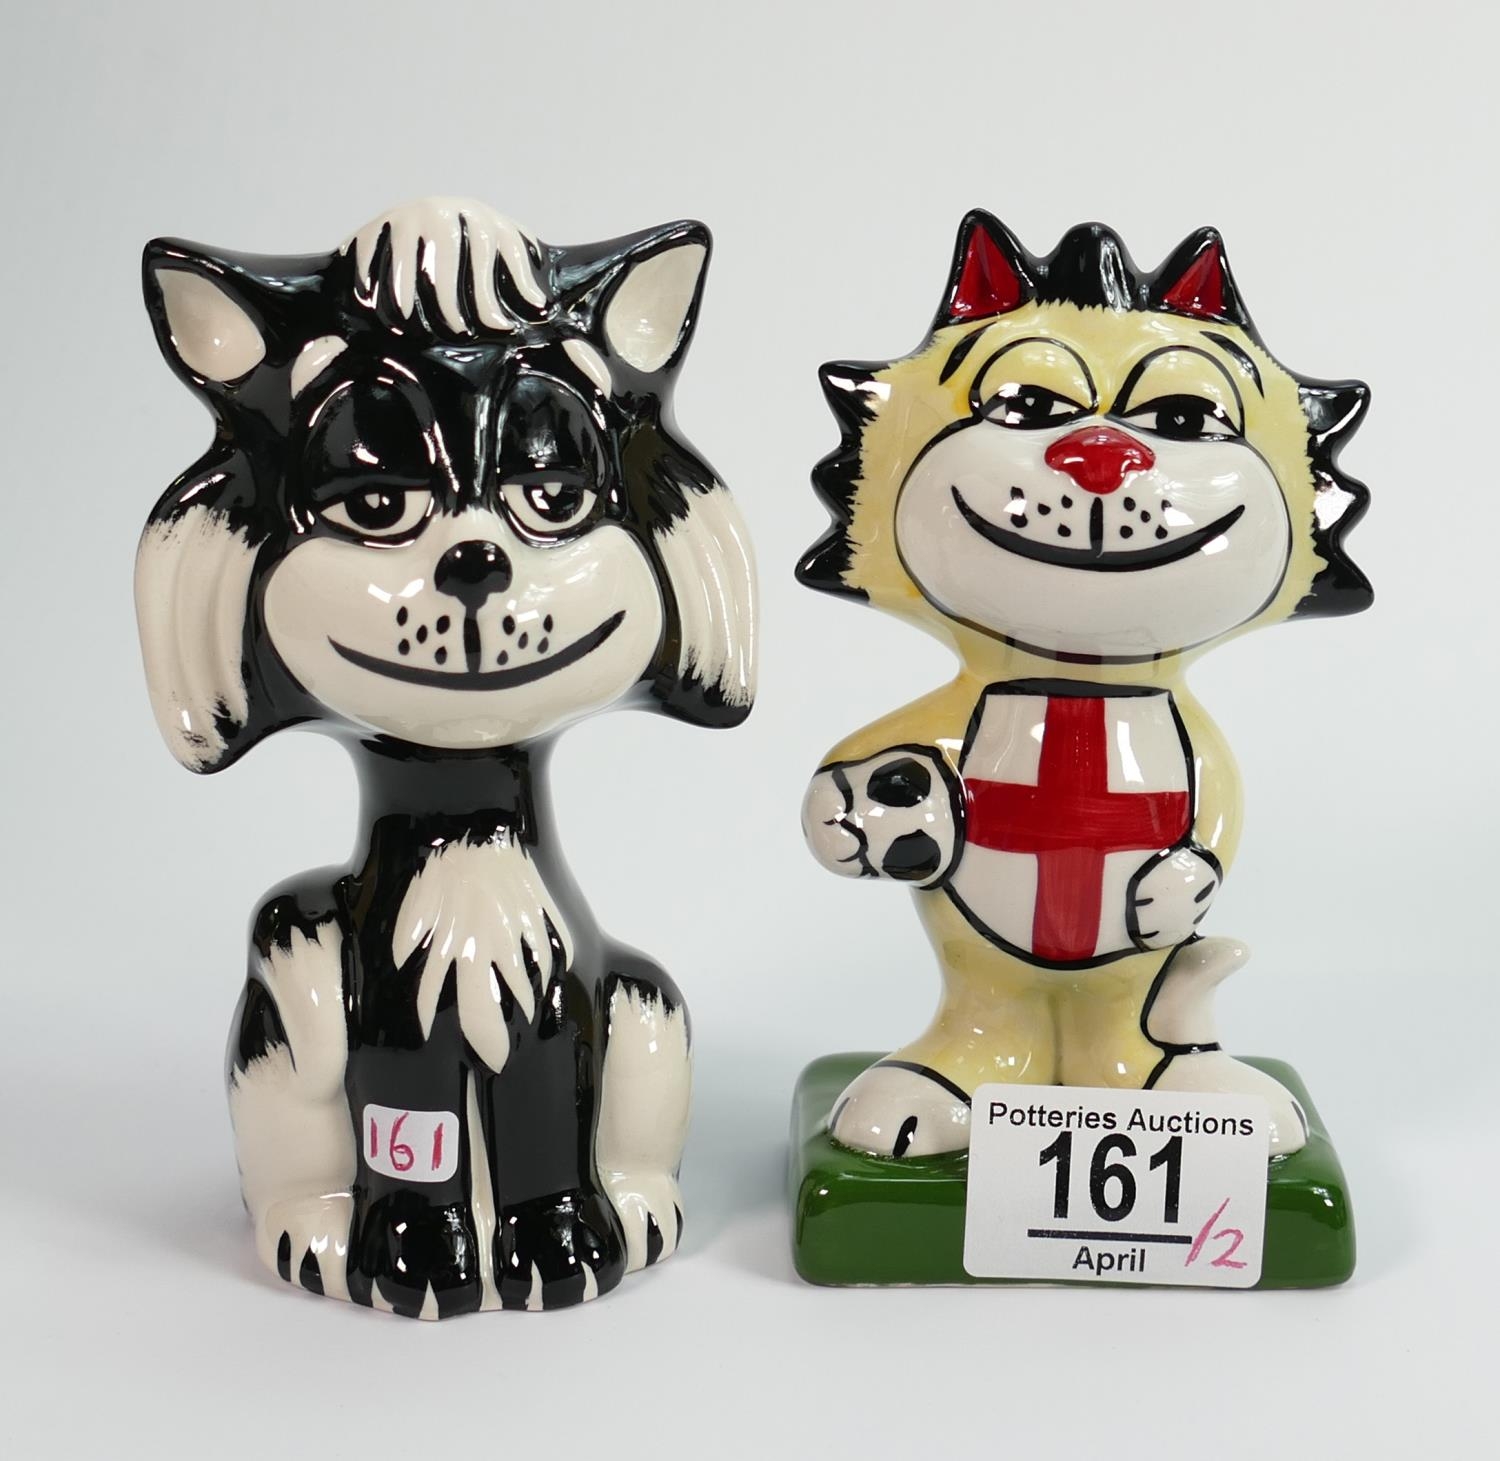 Lorna Bailey pair of cats: Come on England & Dozer